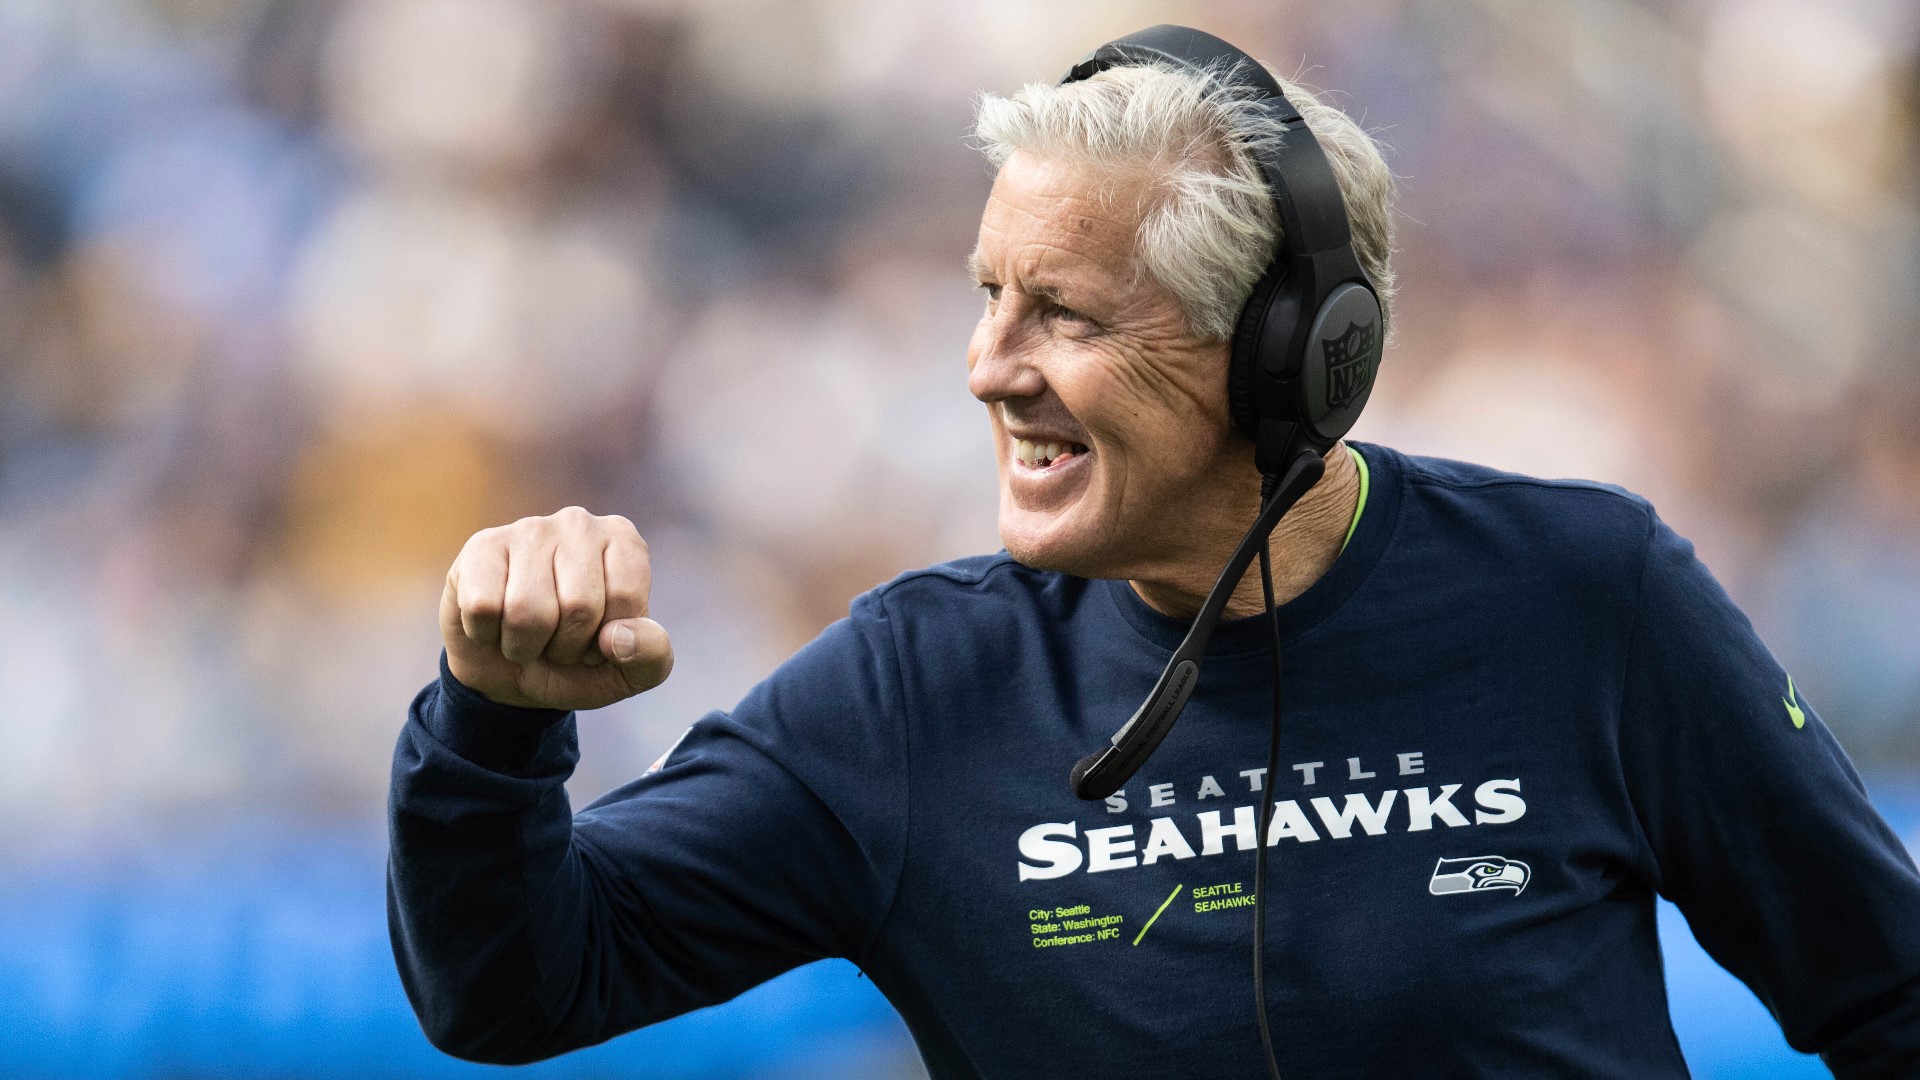 Seahawks in rare spot holding No. 5 overall pick in NFL draft